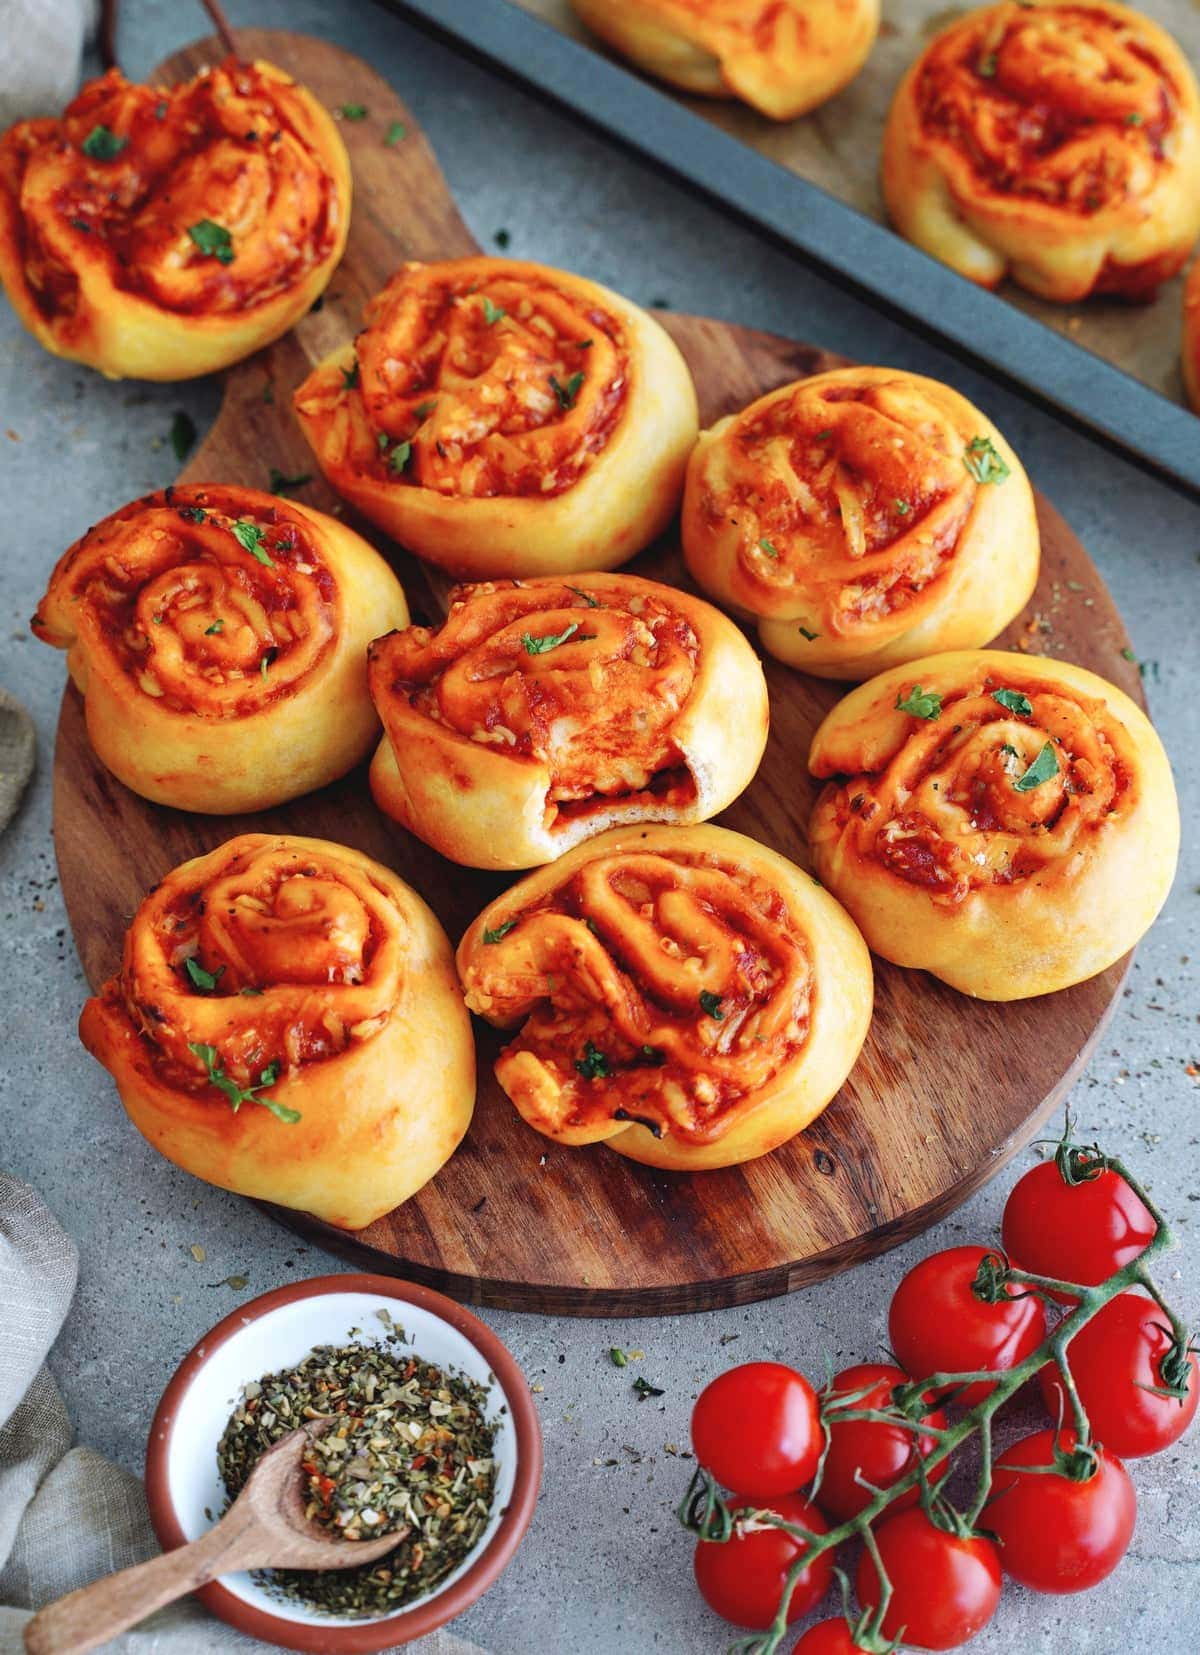 tomato pizza buns on wooden board